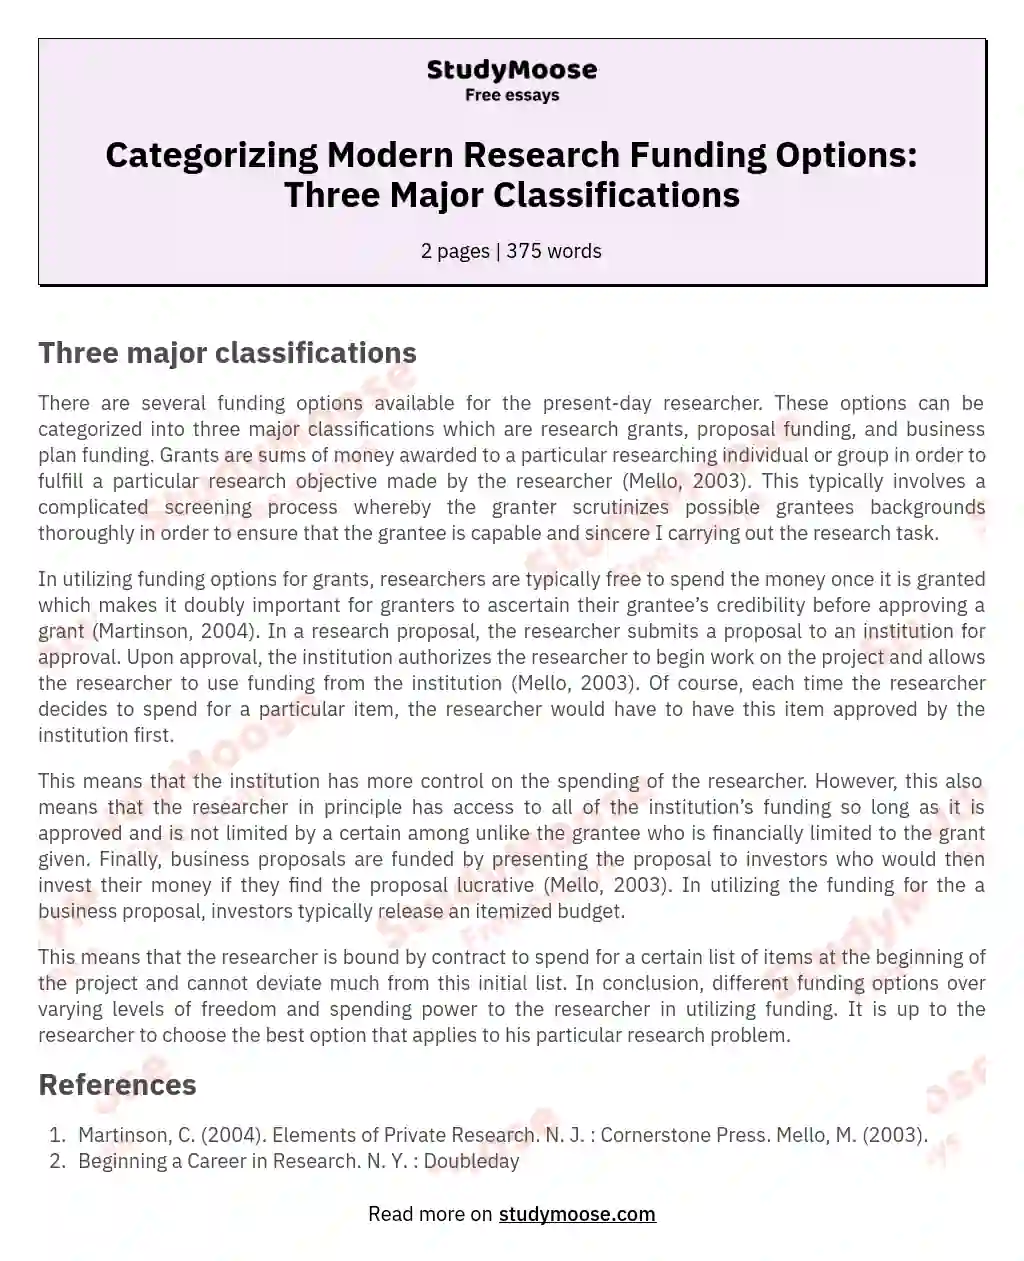 Categorizing Modern Research Funding Options: Three Major Classifications essay